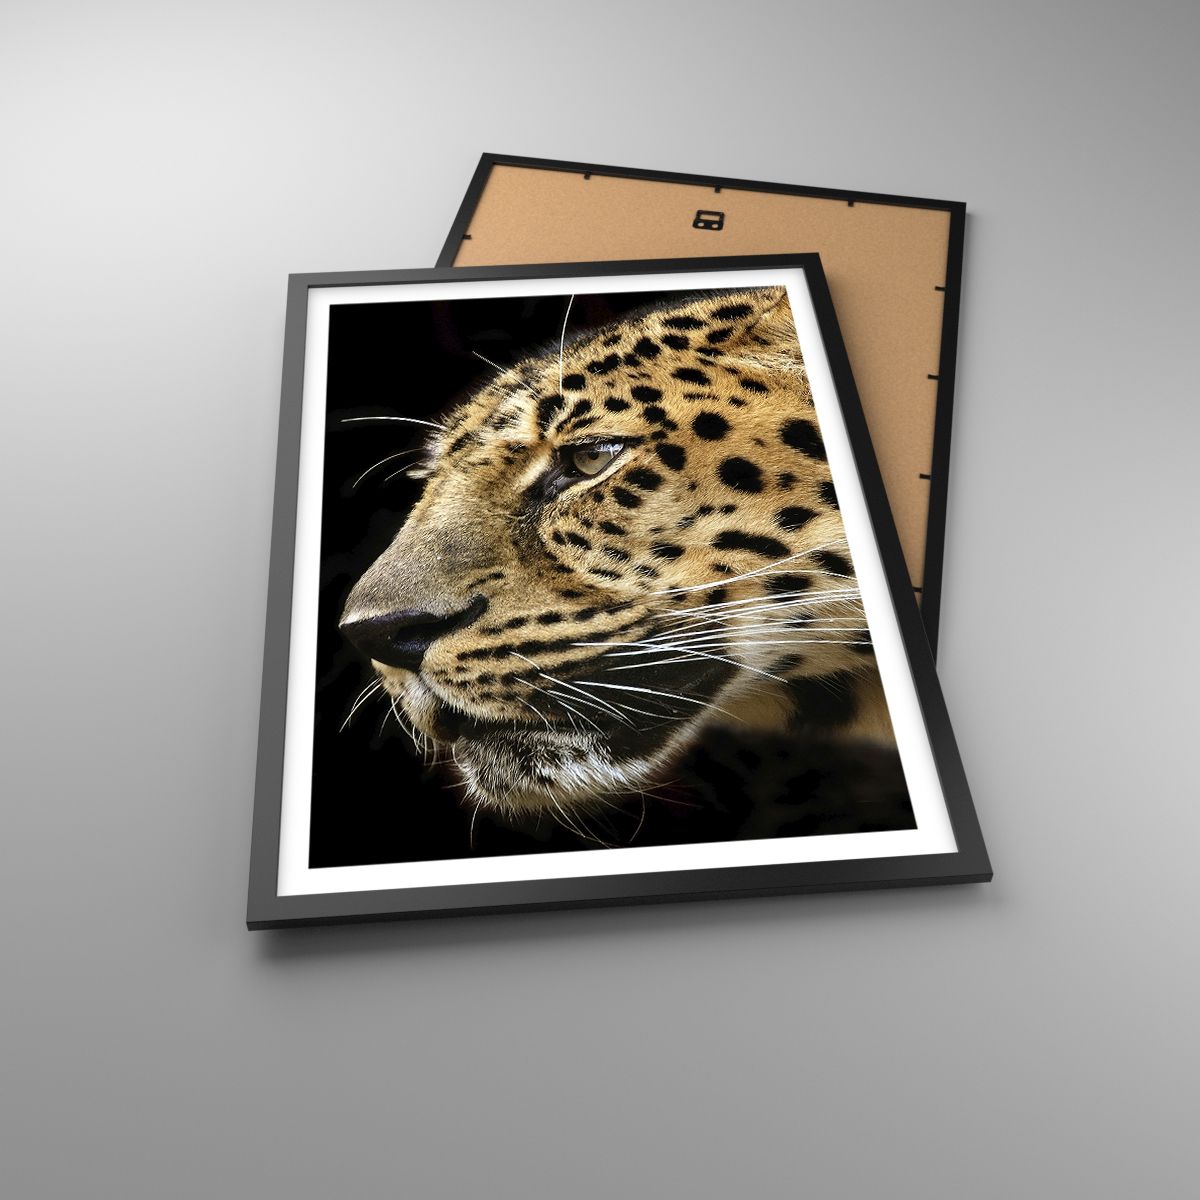 Poster Tiere, Poster Leopard, Poster Afrika, Poster Wilde Katze, Poster Natur